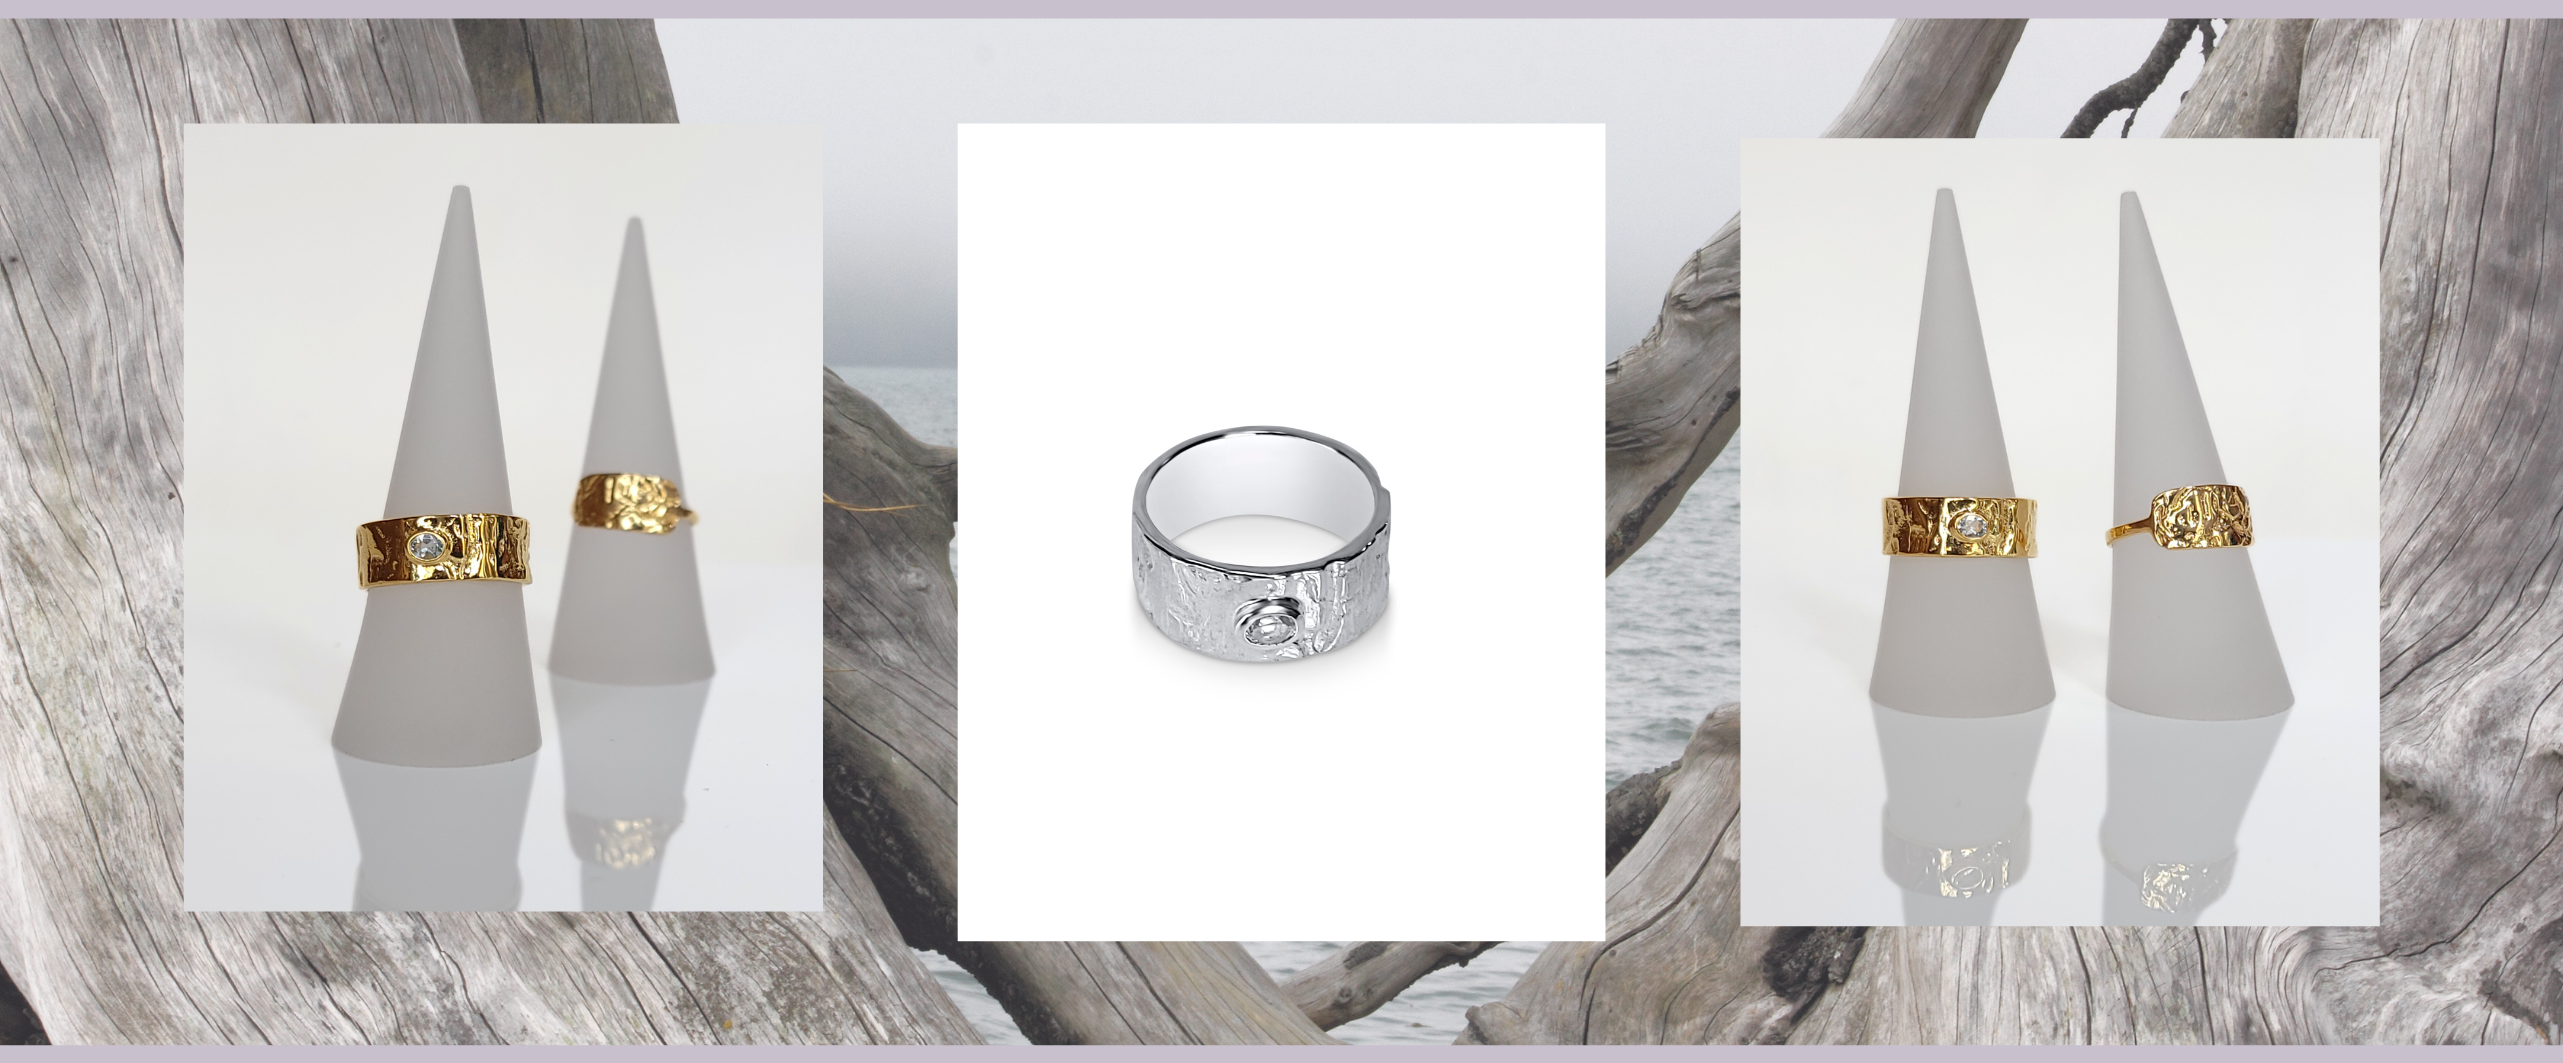 LUXURY_GROVE_DRIFTWOOD_TEXTURED_RINGS